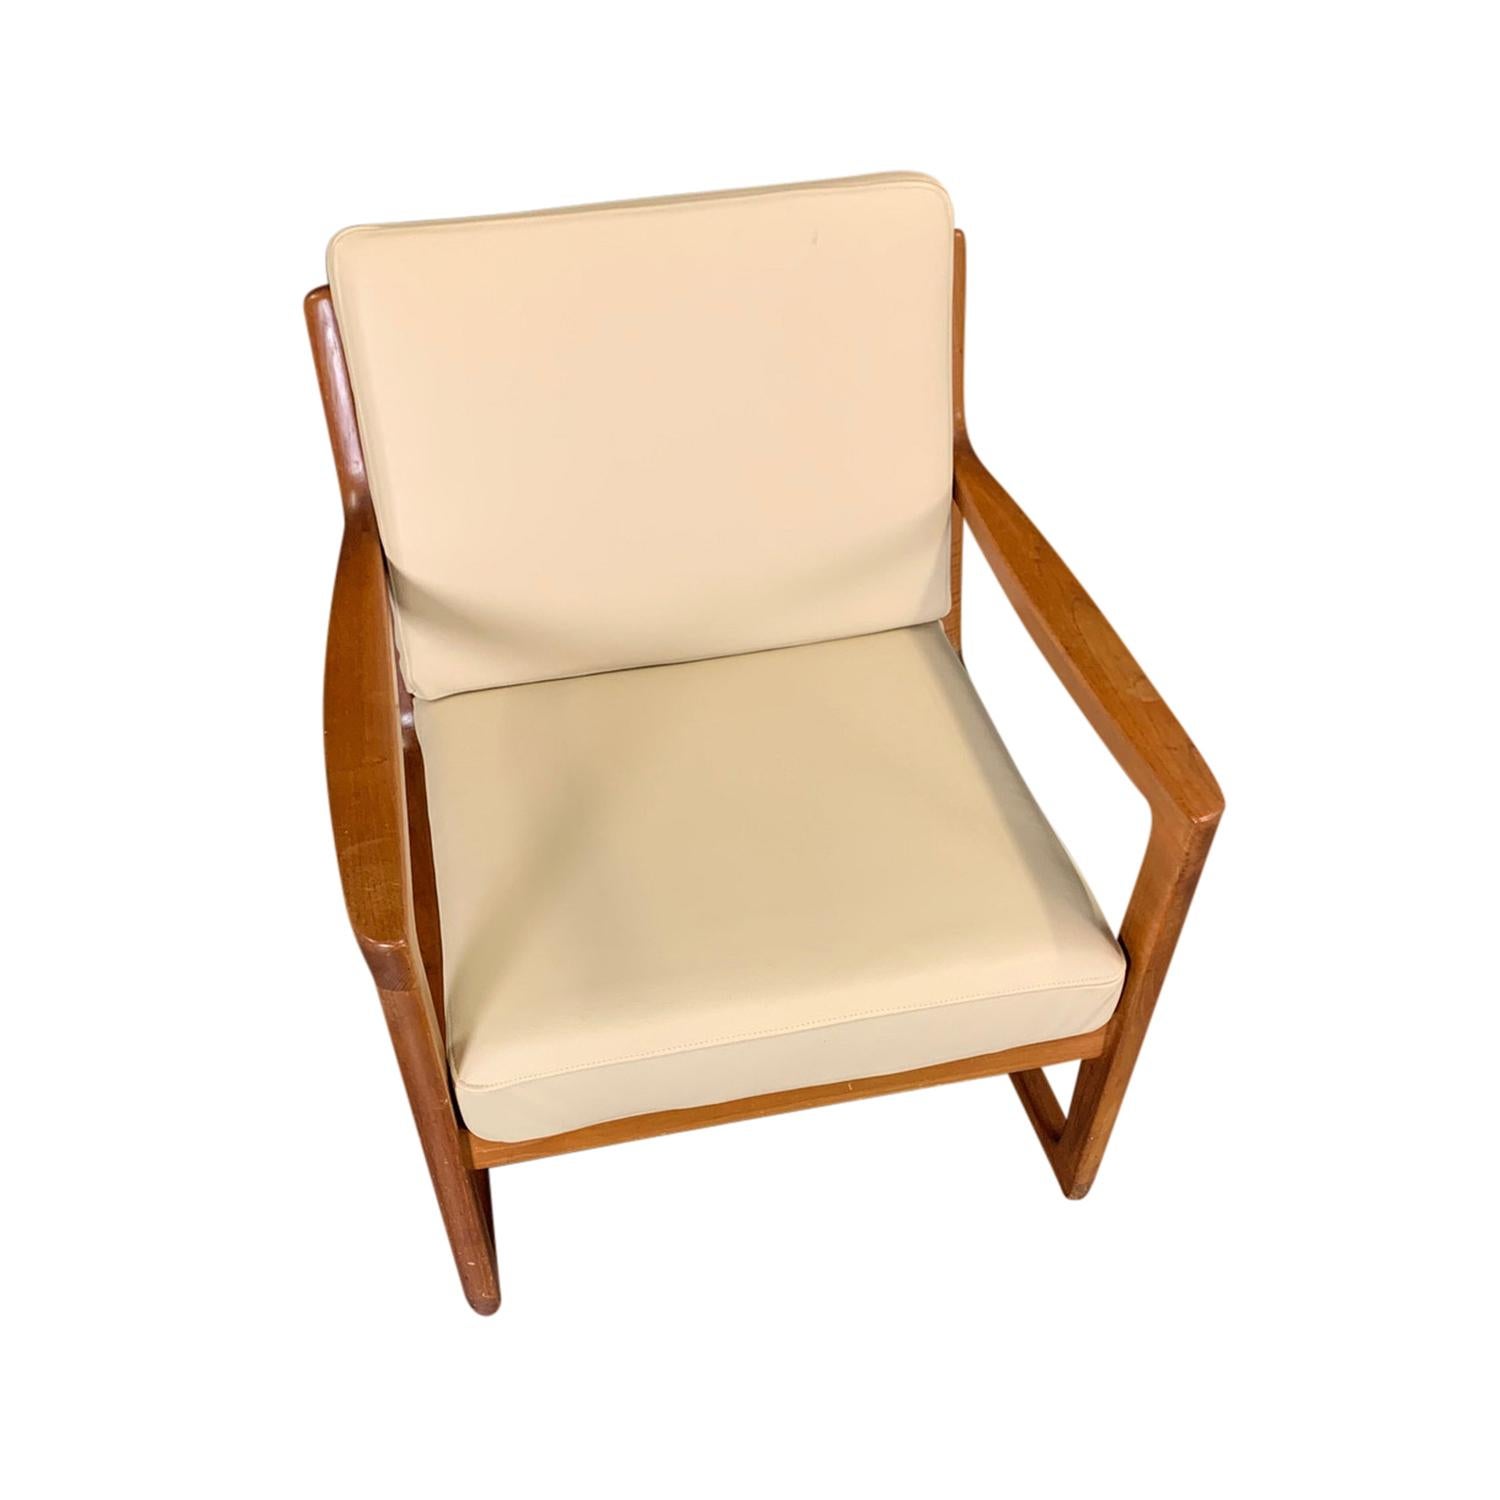 A light-brown, vintage Mid-Century Modern Danish Schaukelstuhl, rocking chair made of hand carved Teakwood, designed by Ole Wanscher and produced by France & Søn, in good condition. The back rest of the Scandinavian side, end chair is open with